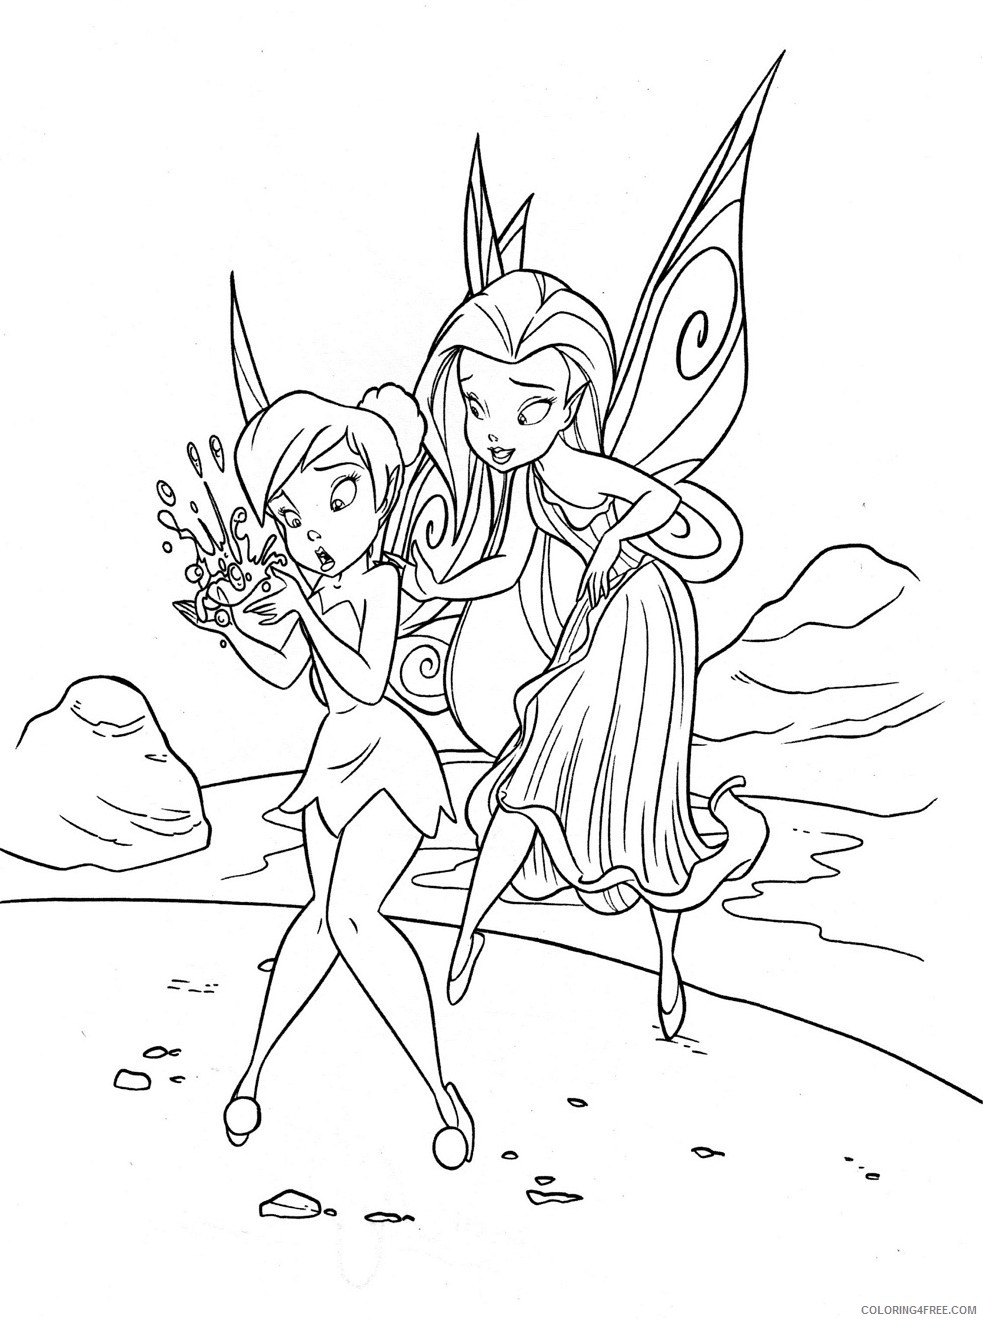 Tinker Bell Coloring Pages Cartoons Tinkerbell Fairy e1421927492356 Printable 2020 6688 Coloring4free